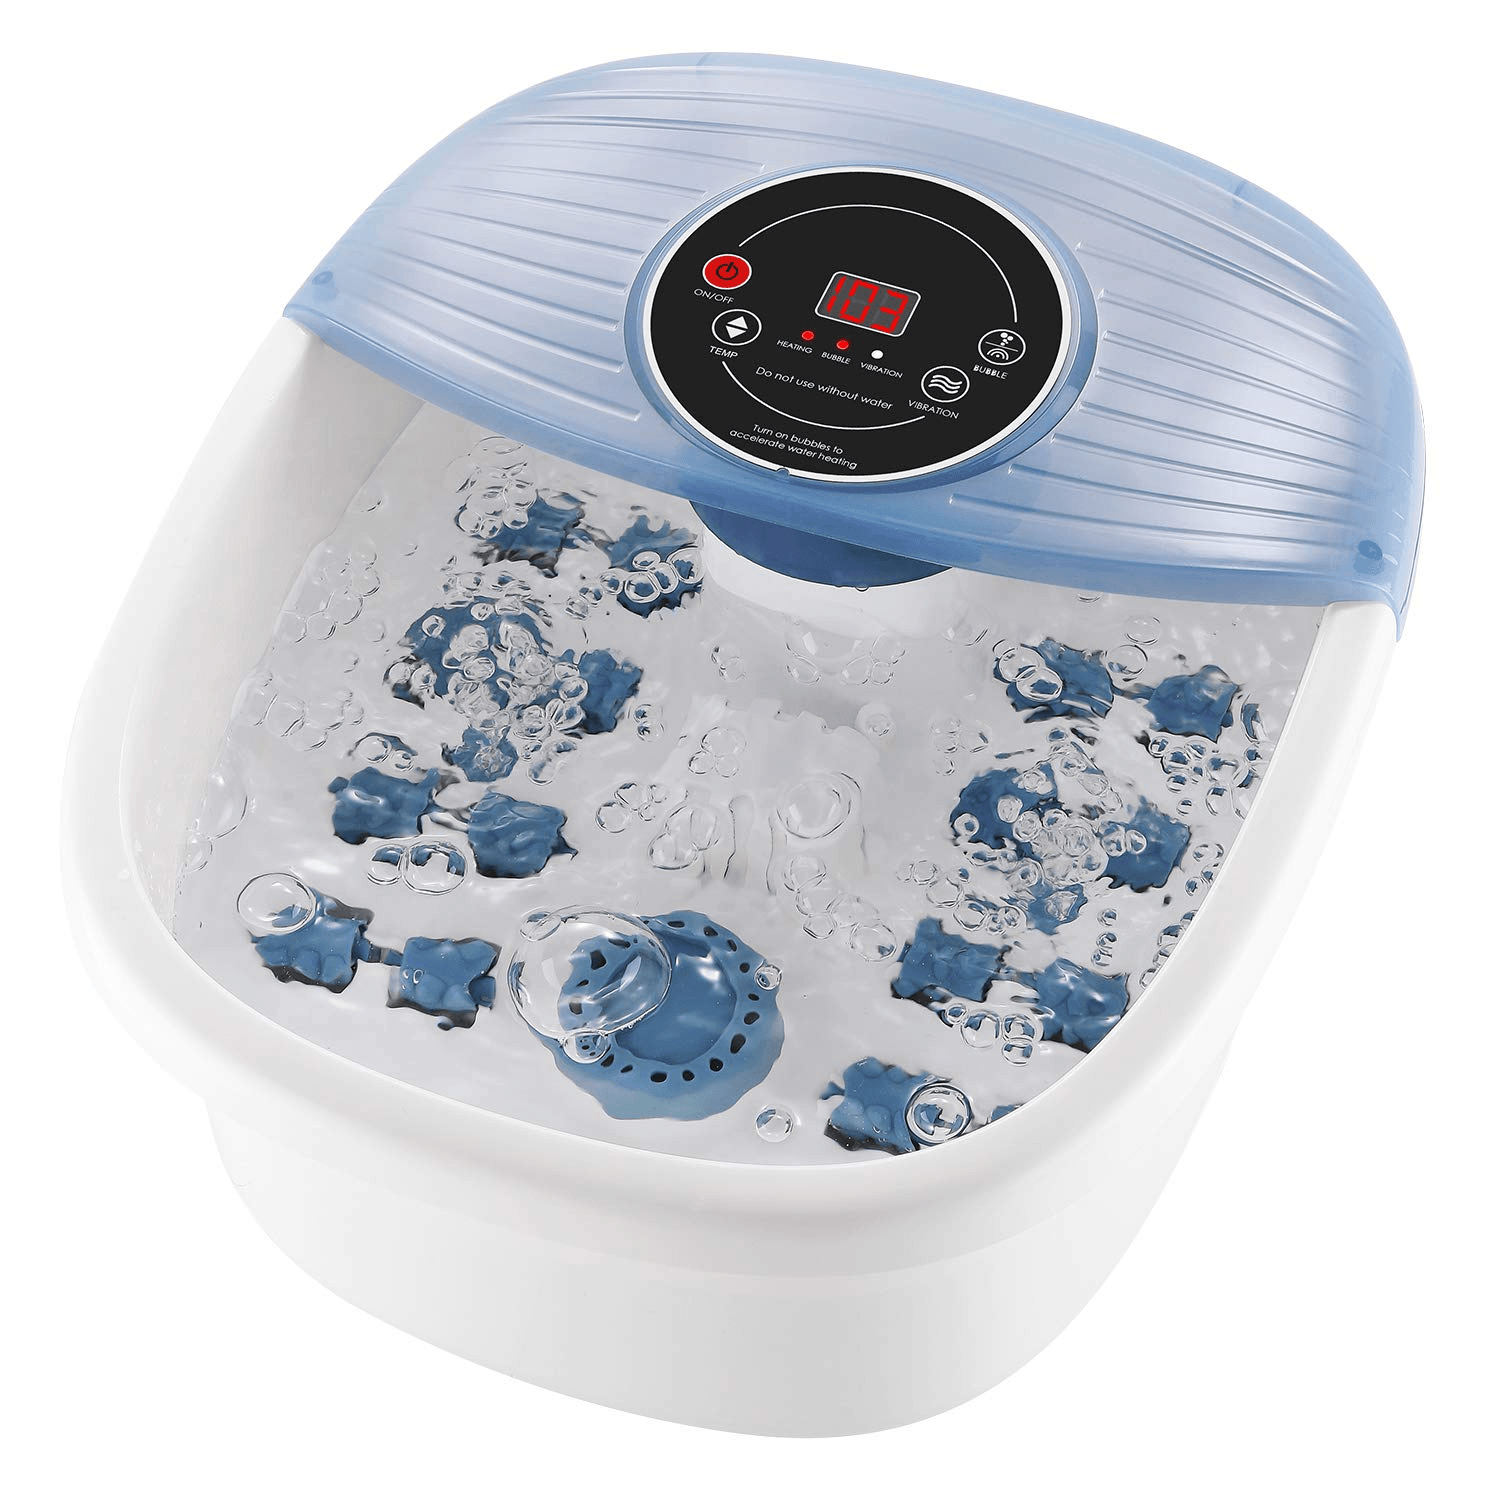 Load image into Gallery viewer, Foot Spa Bath Massager with Heat Bubbles Vibration 3 in 1 Function, 16 Masssage Rollers Soaker Digital Temperature Control Pedicure Tub Bath for Feet Home Use - NAIPO
